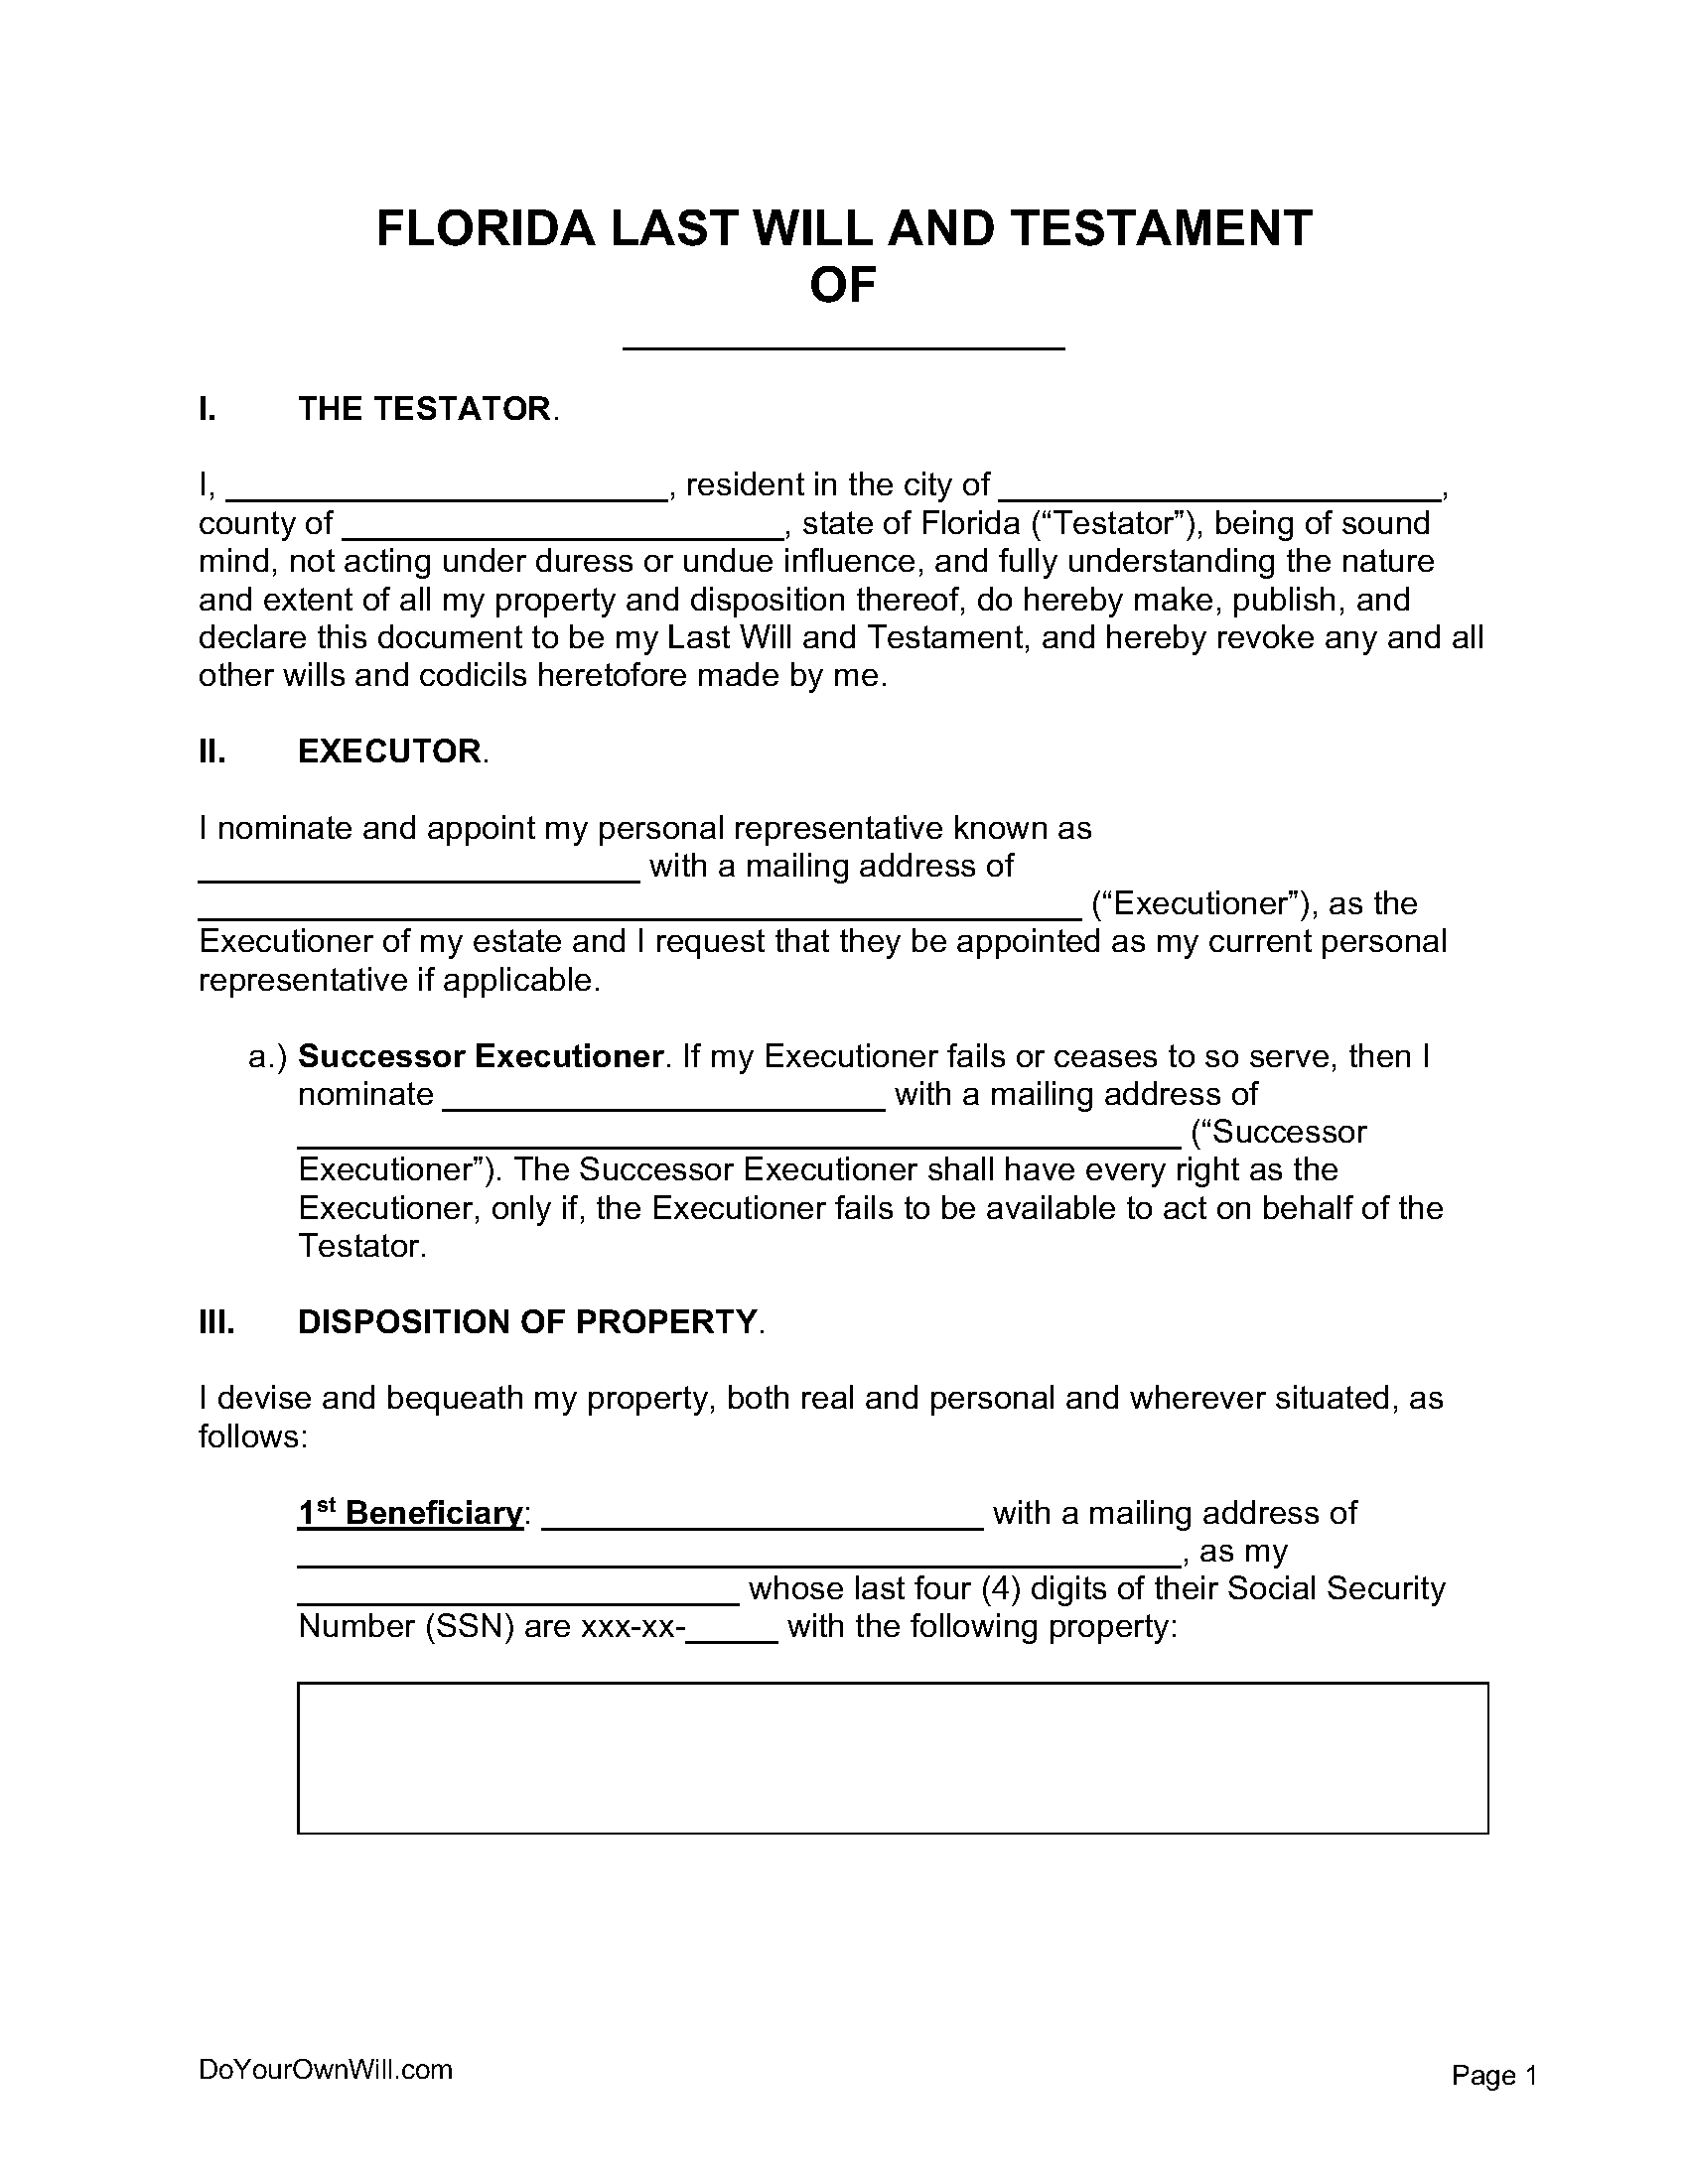 Free Florida Last Will And Testament Form | Pdf | Word | Odt throughout Free Printable Last Will And Testament Blank Forms Florida